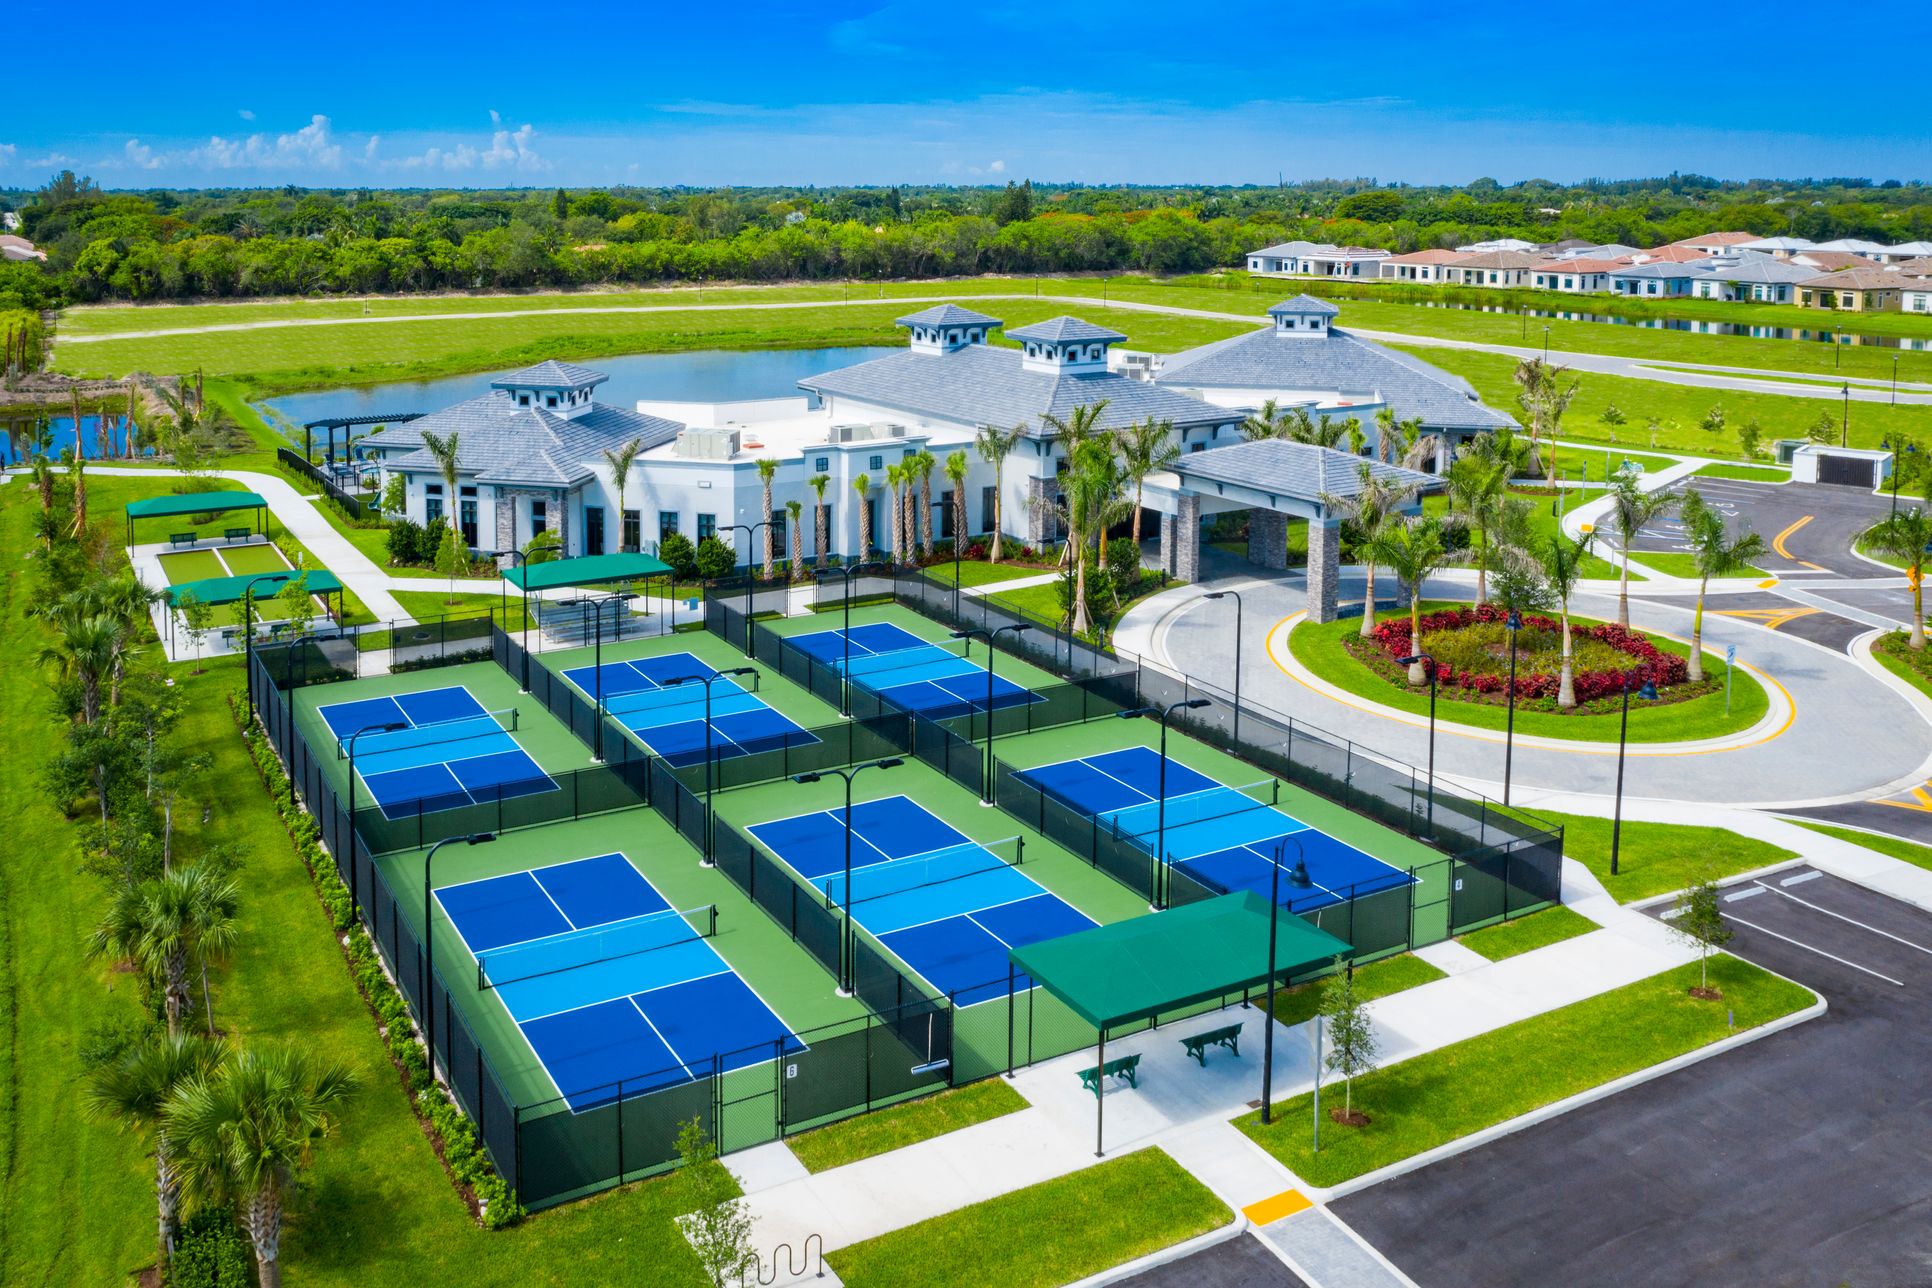 CONTEMPORARY CLUBHOUSE AND WORLD-CLASS AMENITIES